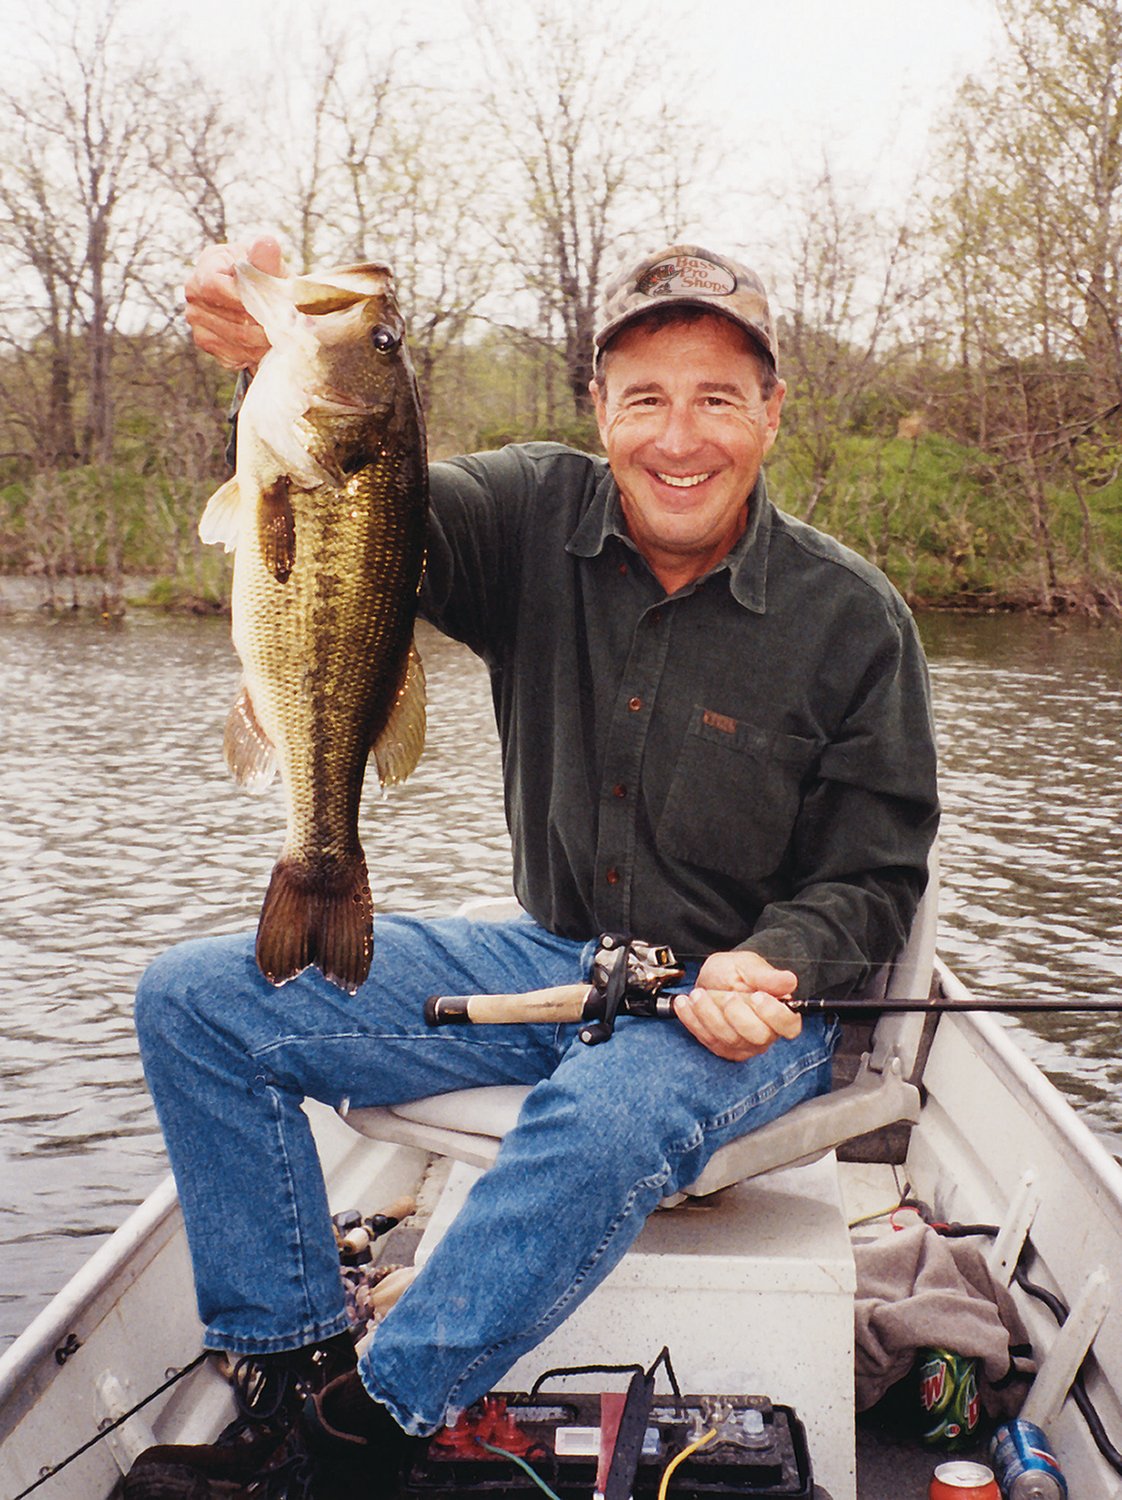 To kickstart its 50th Anniversary Celebration, Bass Pro Shops and Johnny Morris (above) have announced the grandest fishing tournament in history.